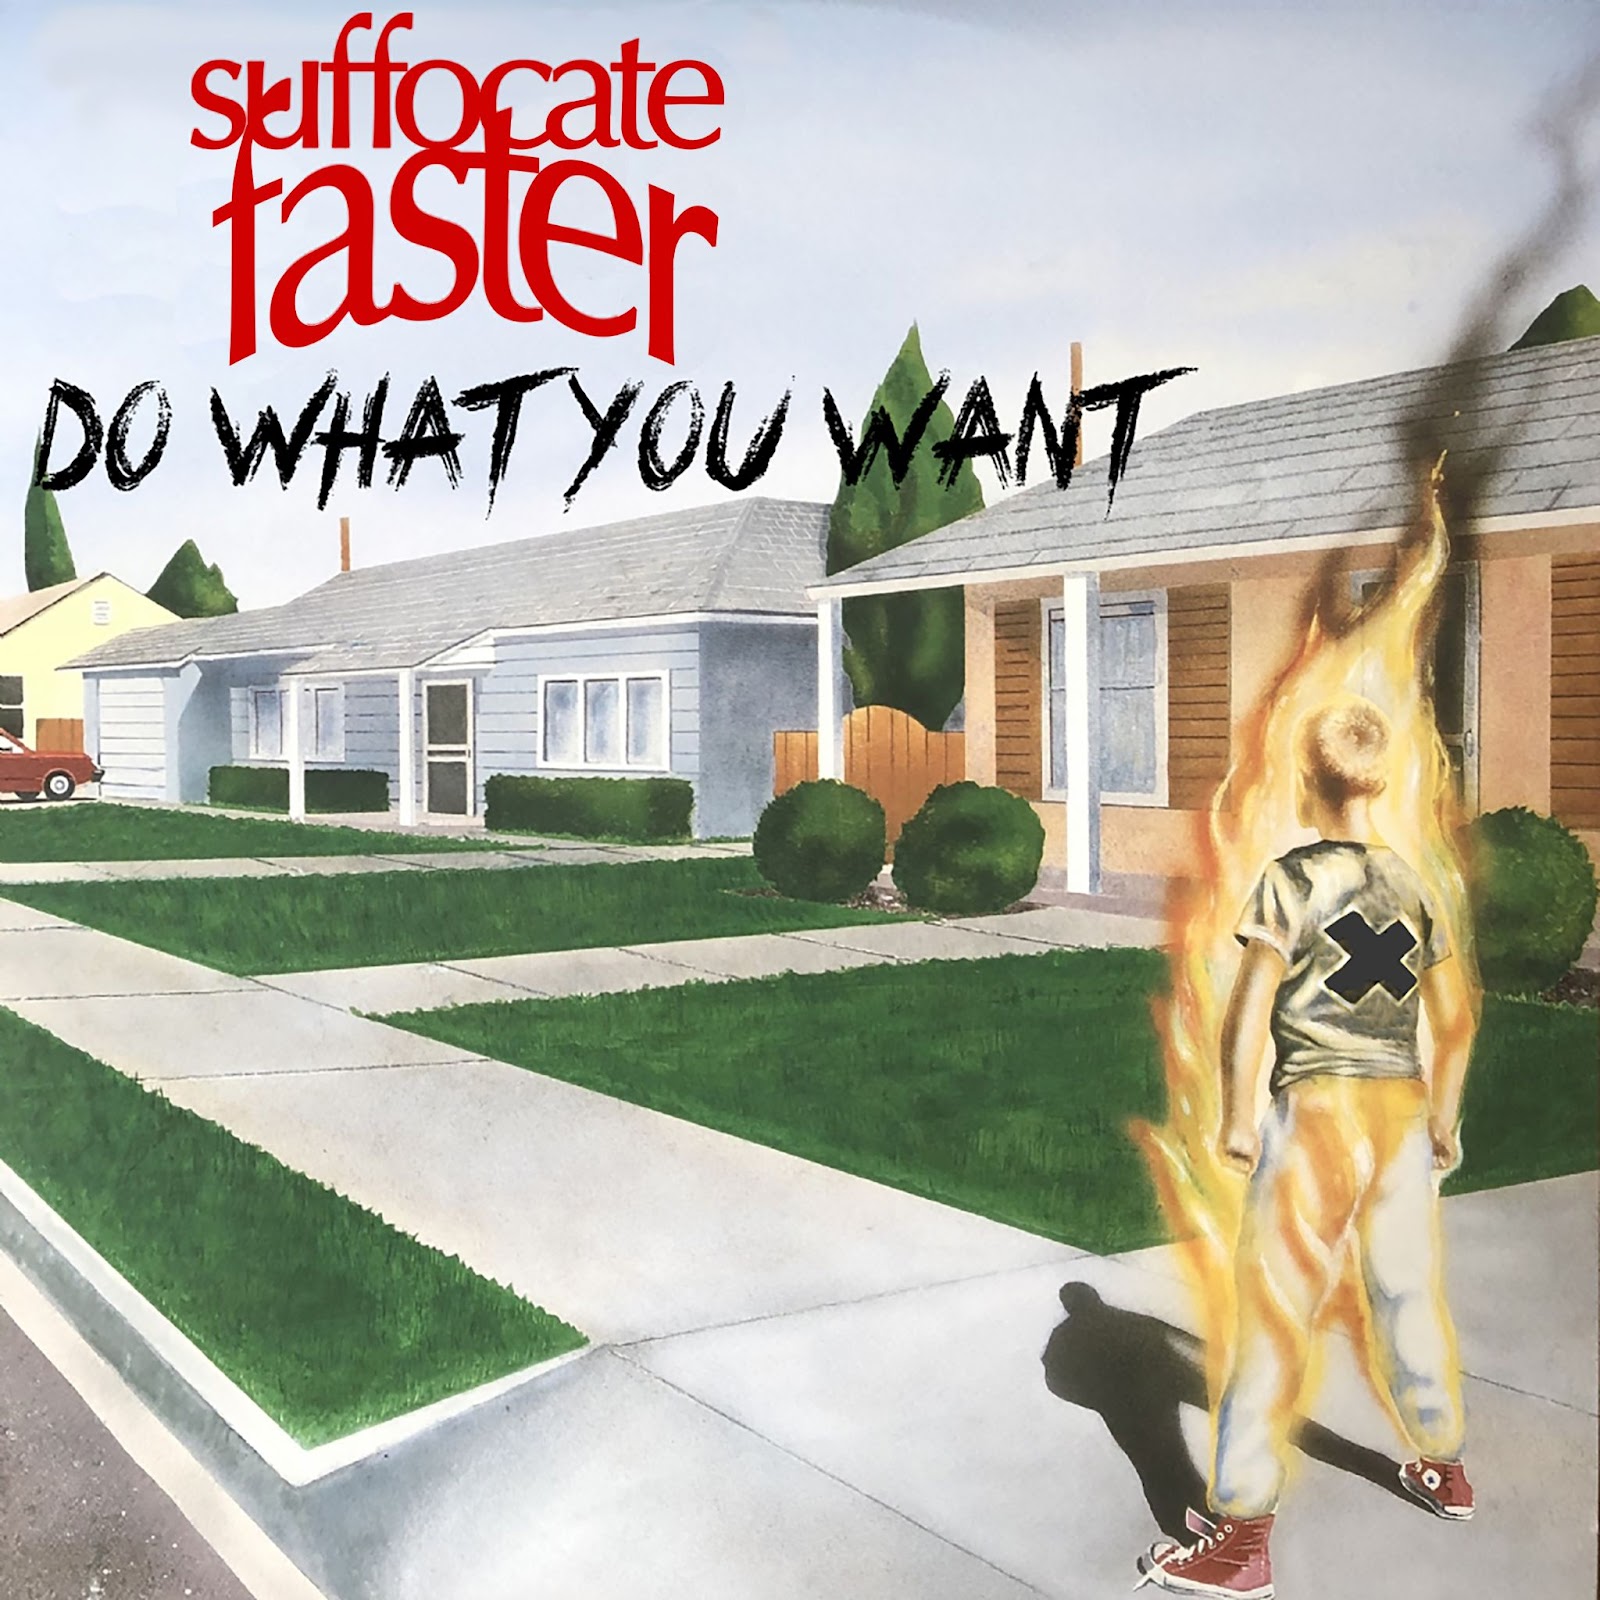 Suffocate Faster Cover Bad Religion's Punk Classic 'Do What You Want' 